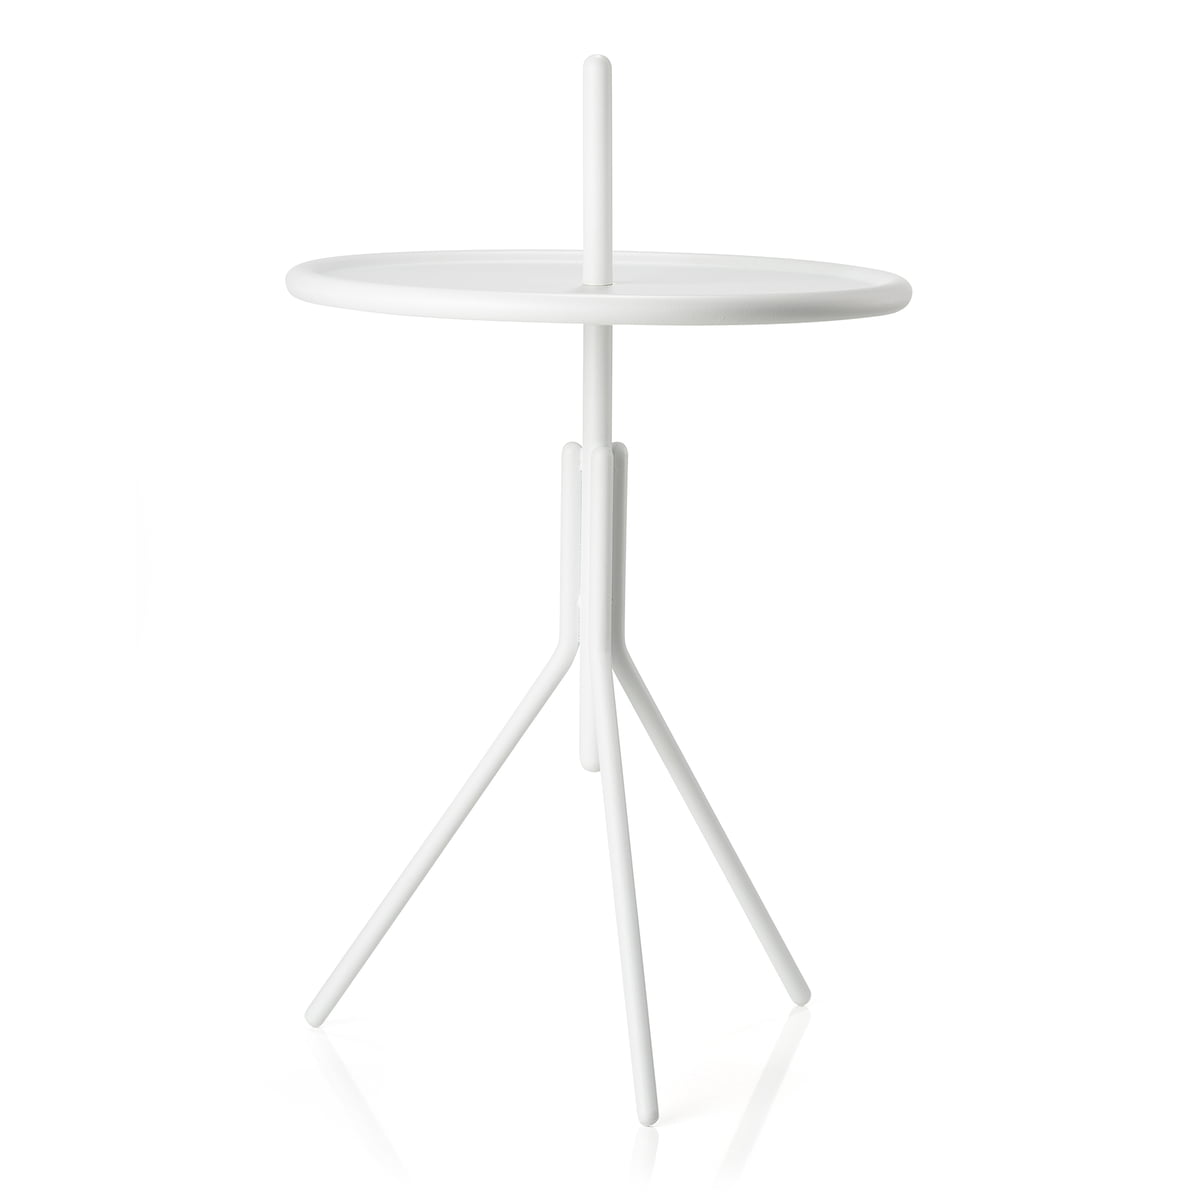 Zone Denmark - Table d'appoint Inu, Ø 33,8 x H 54,5 cm, blanche